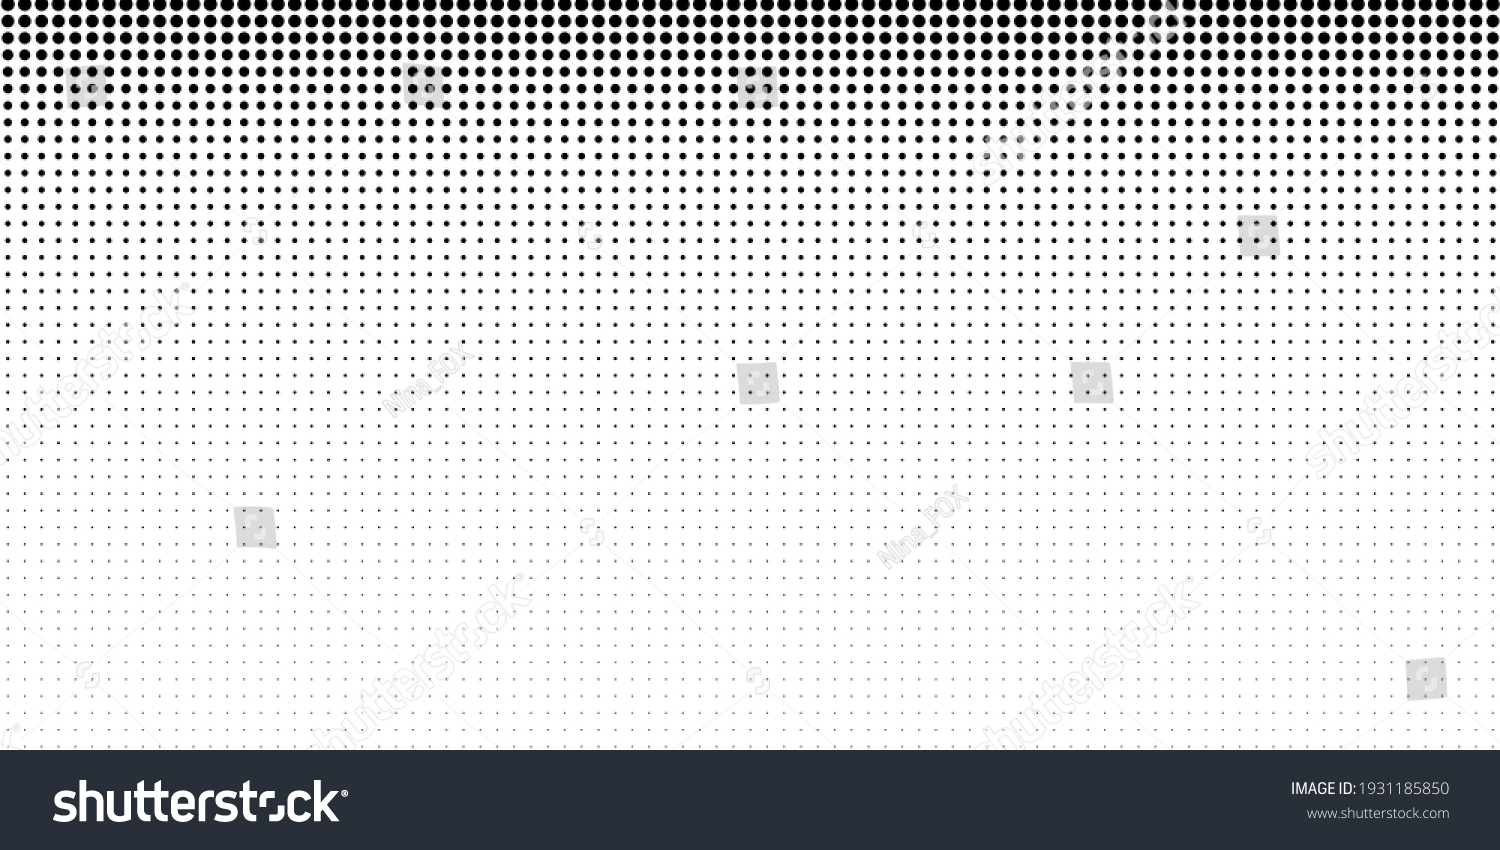 Halftone texture with dots. Vector. Modern background for posters, websites, web pages, business cards, postcards, interior design. Punk, pop, grunge in vintage style. Minimalism. #1931185850